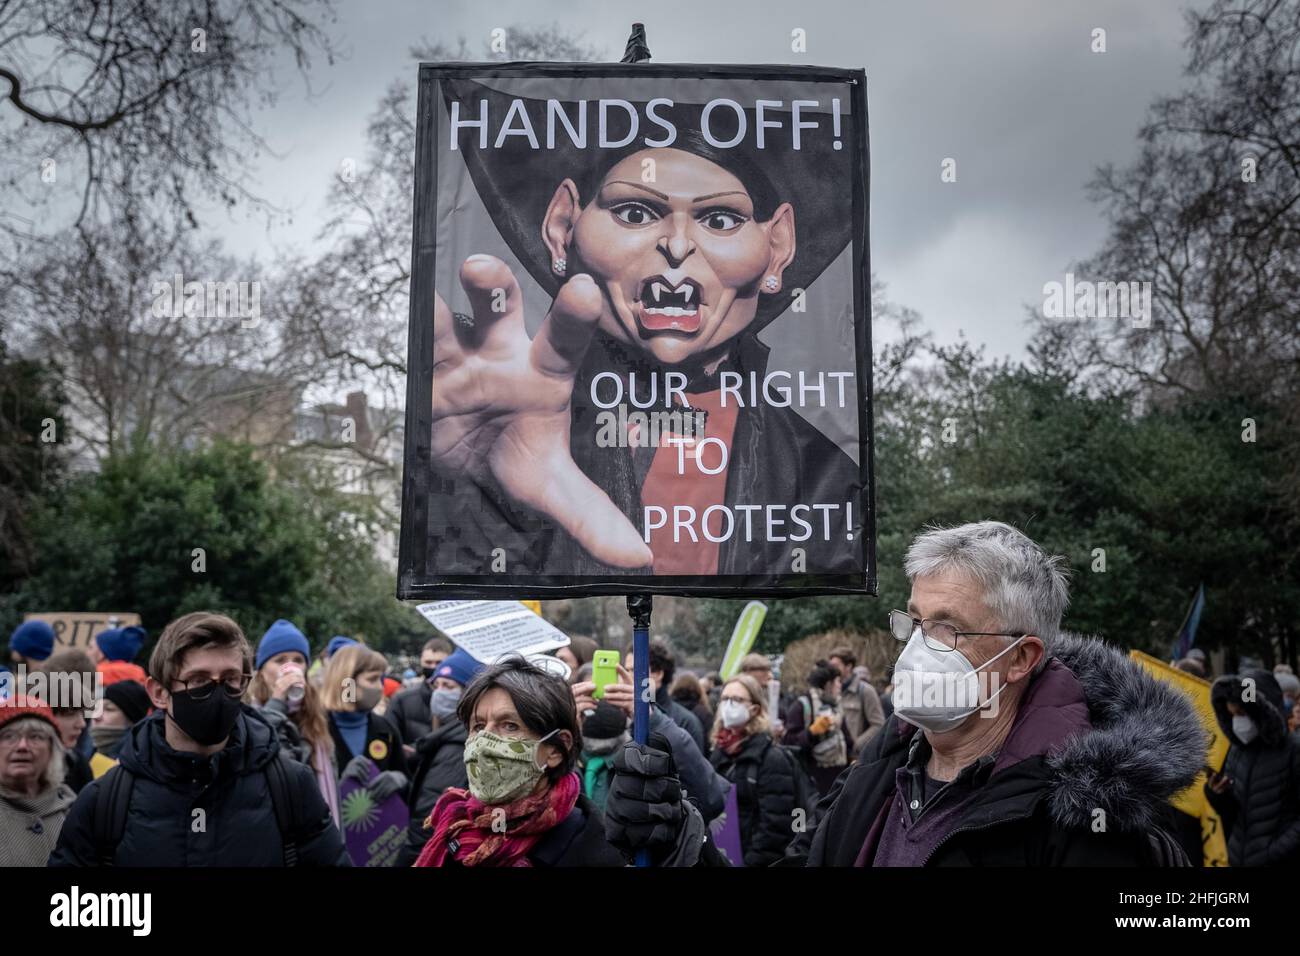 'Kill The Bill' protesters rally against the Police, Crime, Sentencing and Courts Bill (PCSC), which is reaching its final stages in parliament. UK. Stock Photo